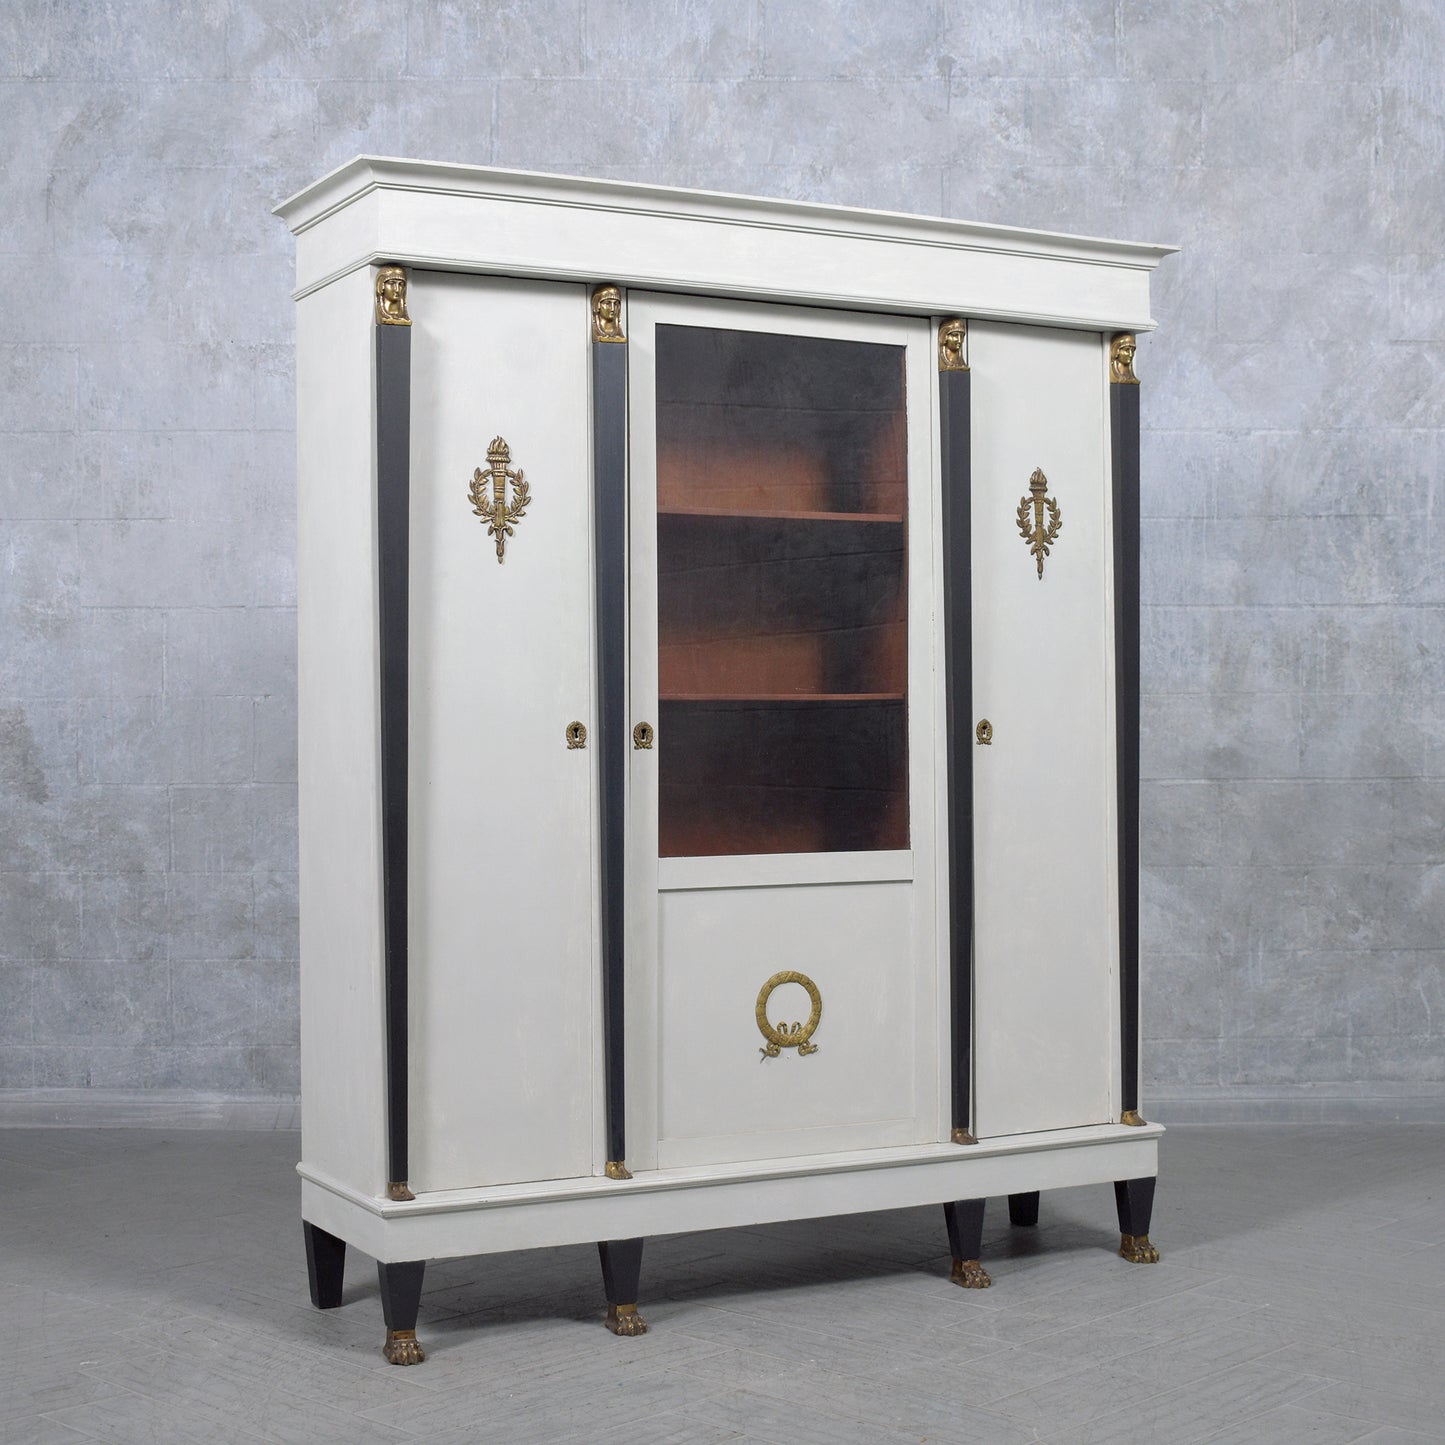 Stunning French Empire Mahogany and Brass Bookcase with Glass Door